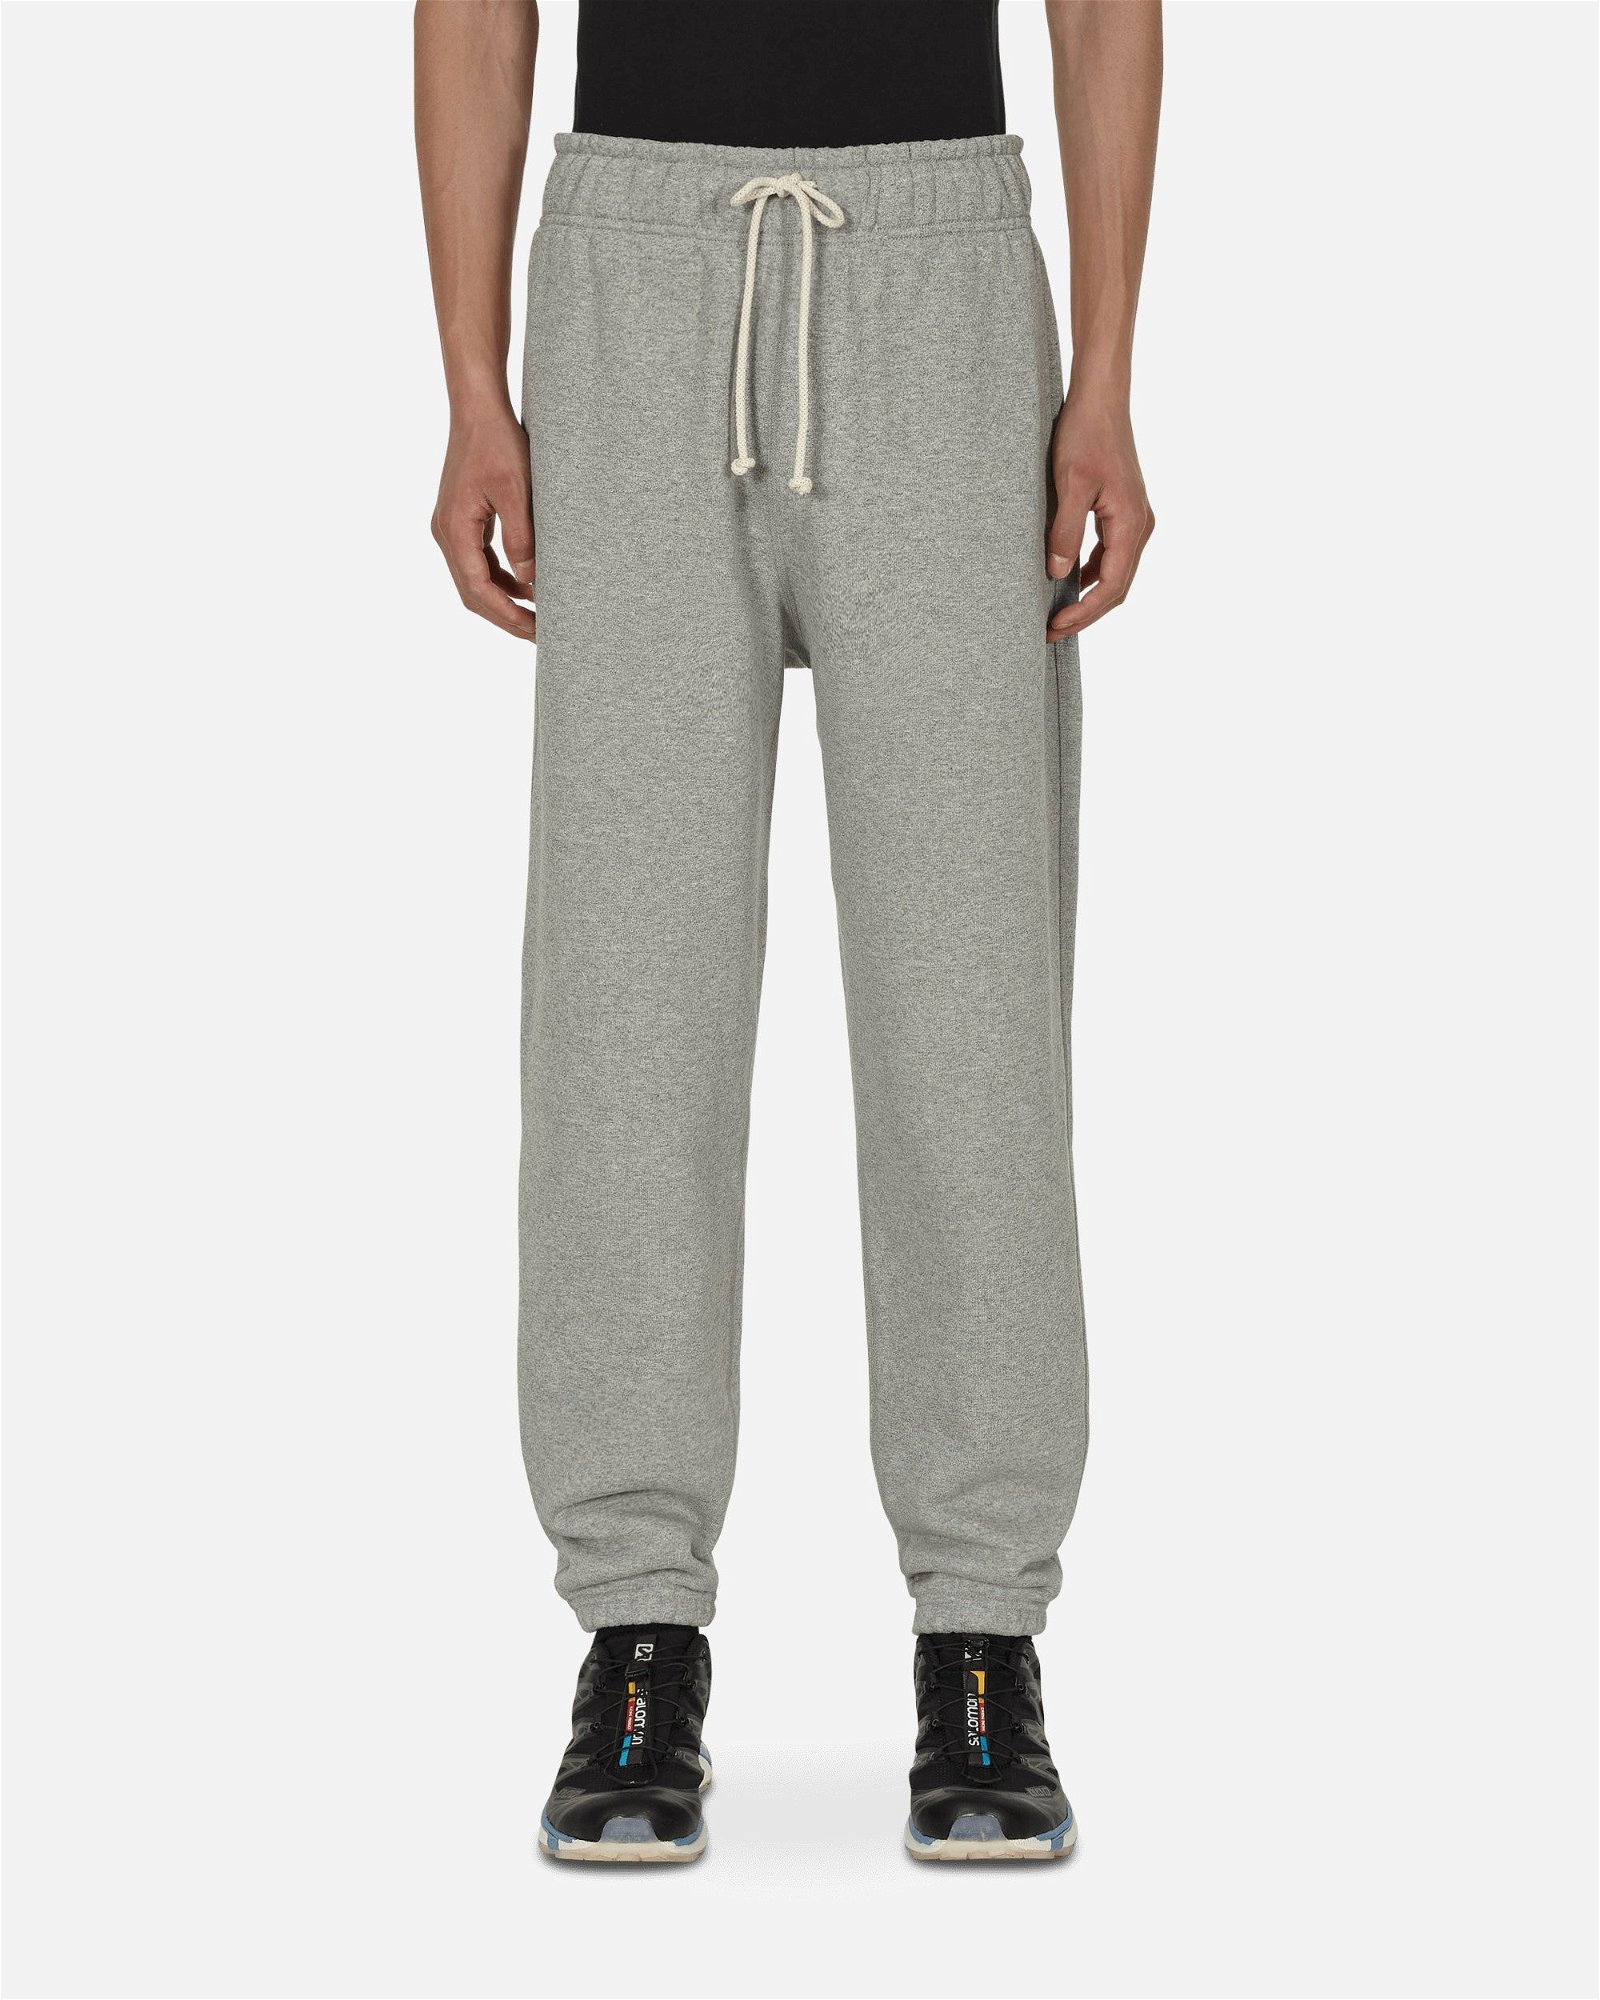 Made in USA Sweatpant